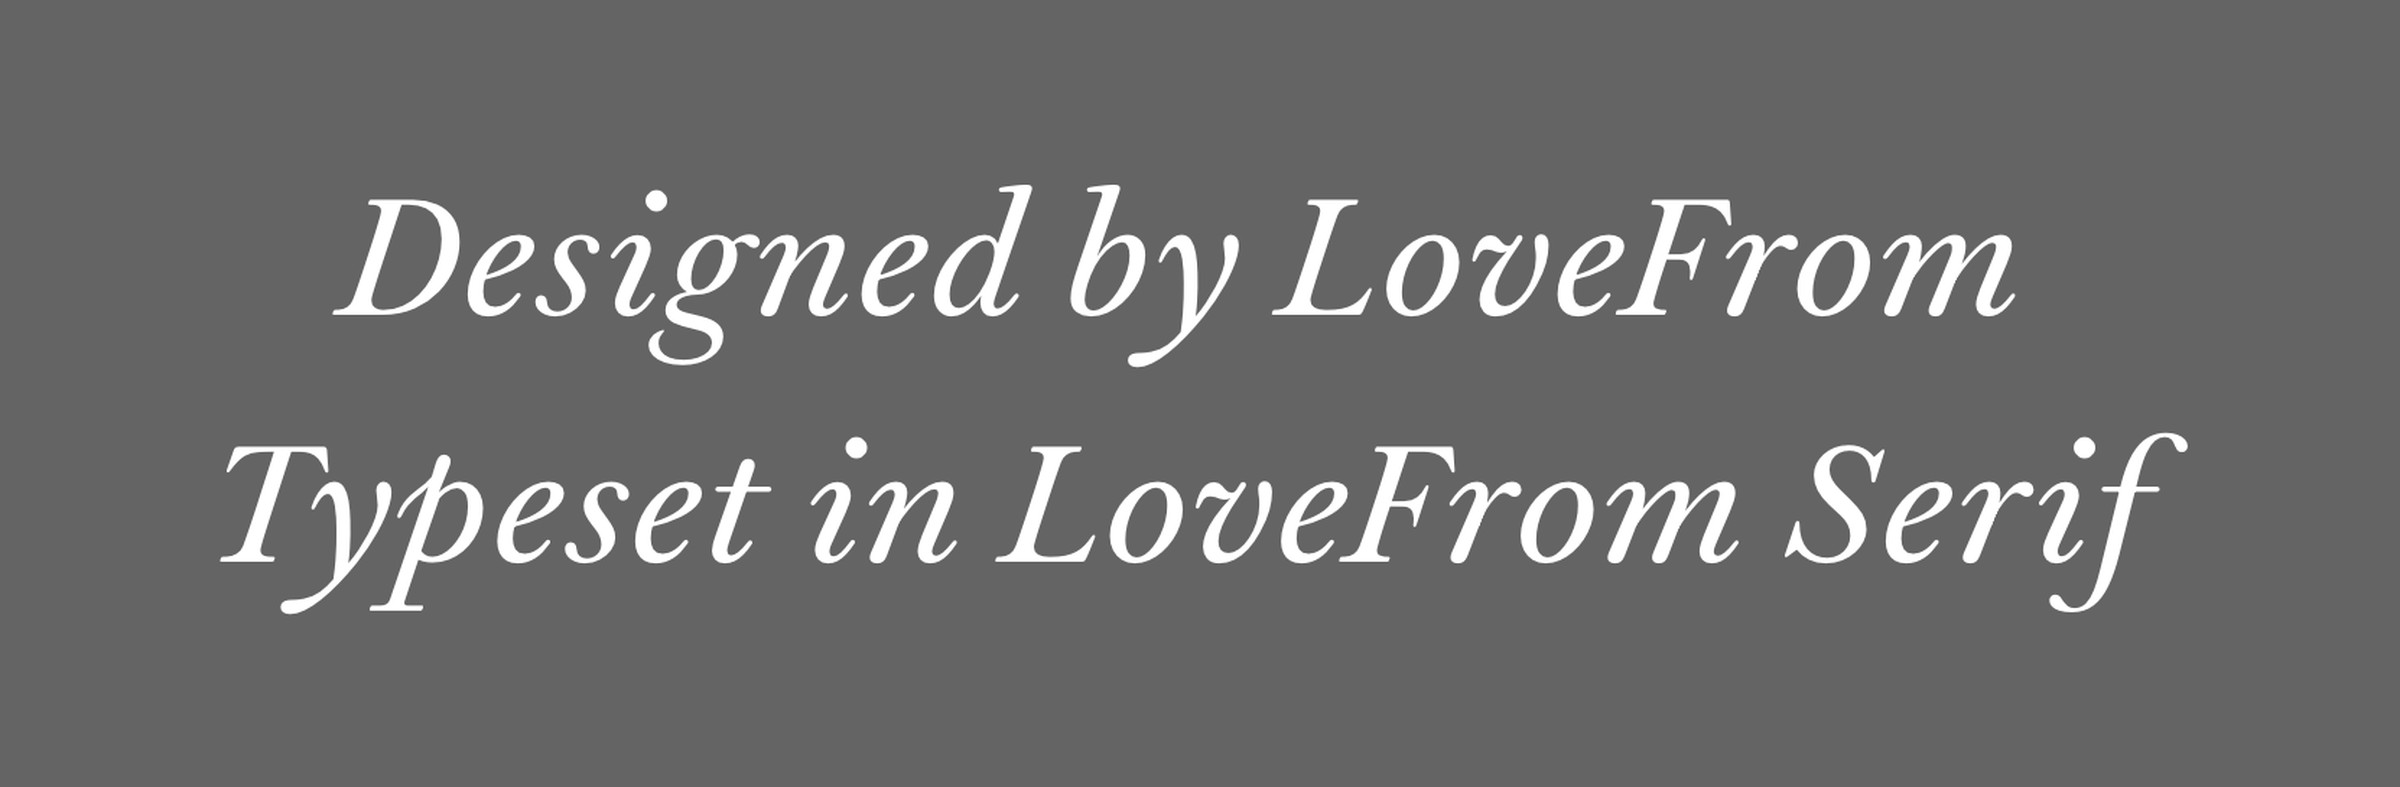 “Designed by LoveFrom. Typeset in LoveFrom Serif.”